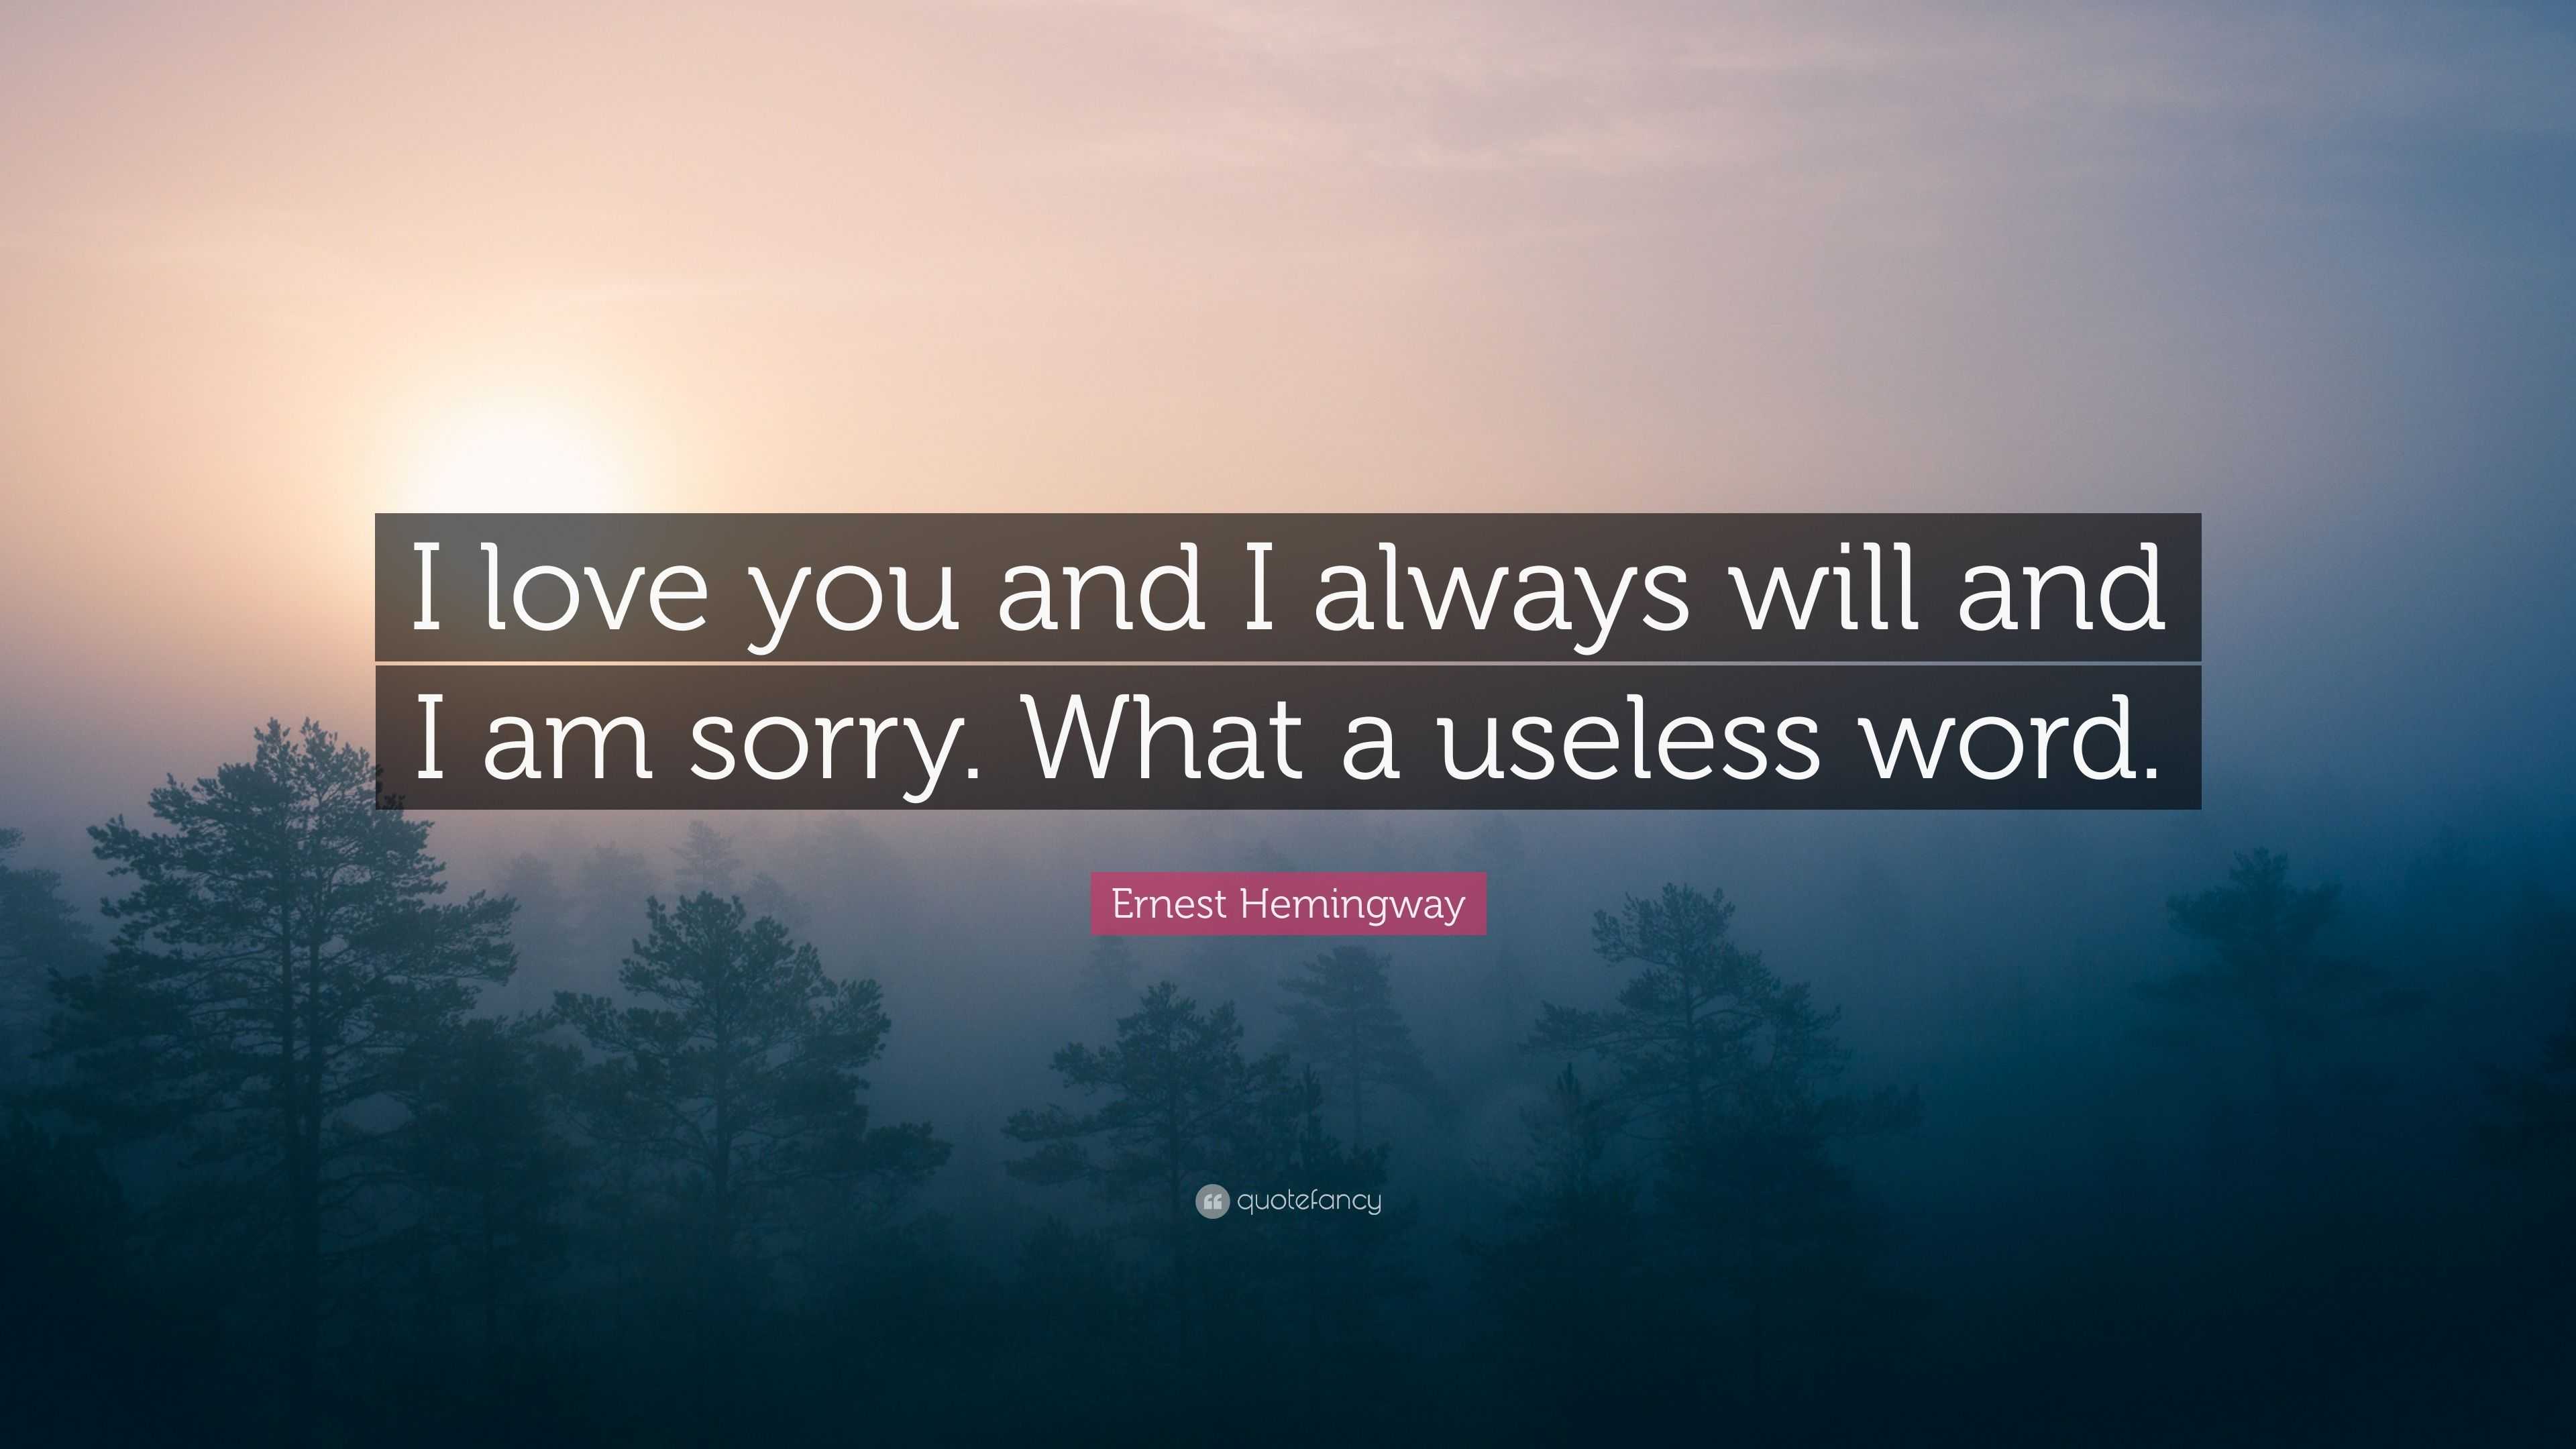 Ernest Hemingway Quote “I love you and I always will and I am sorry